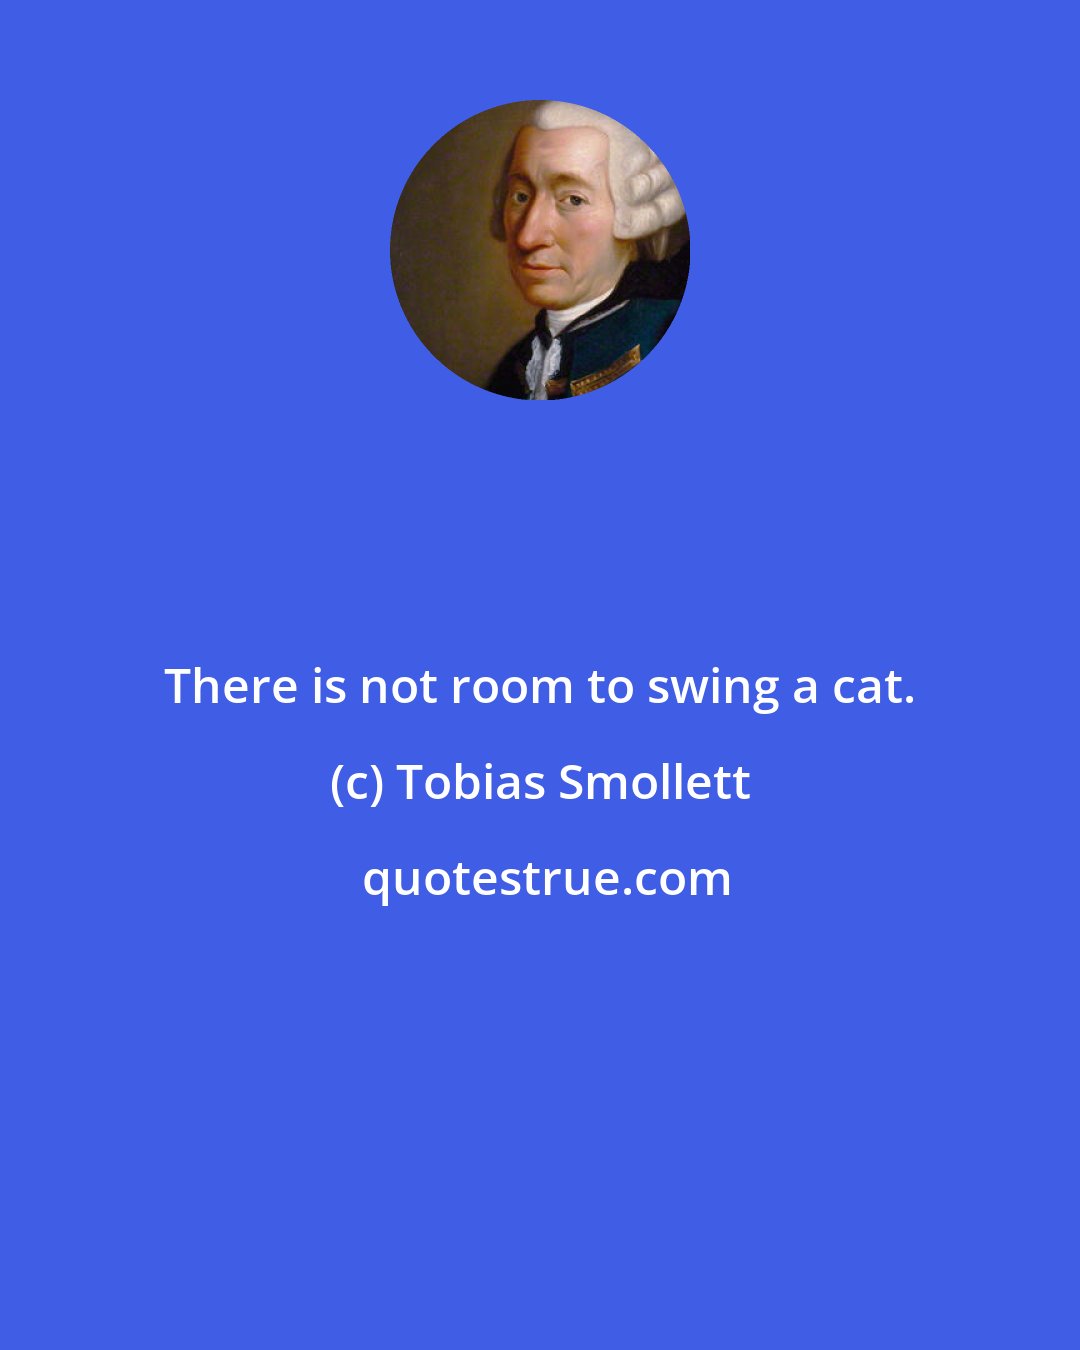 Tobias Smollett: There is not room to swing a cat.